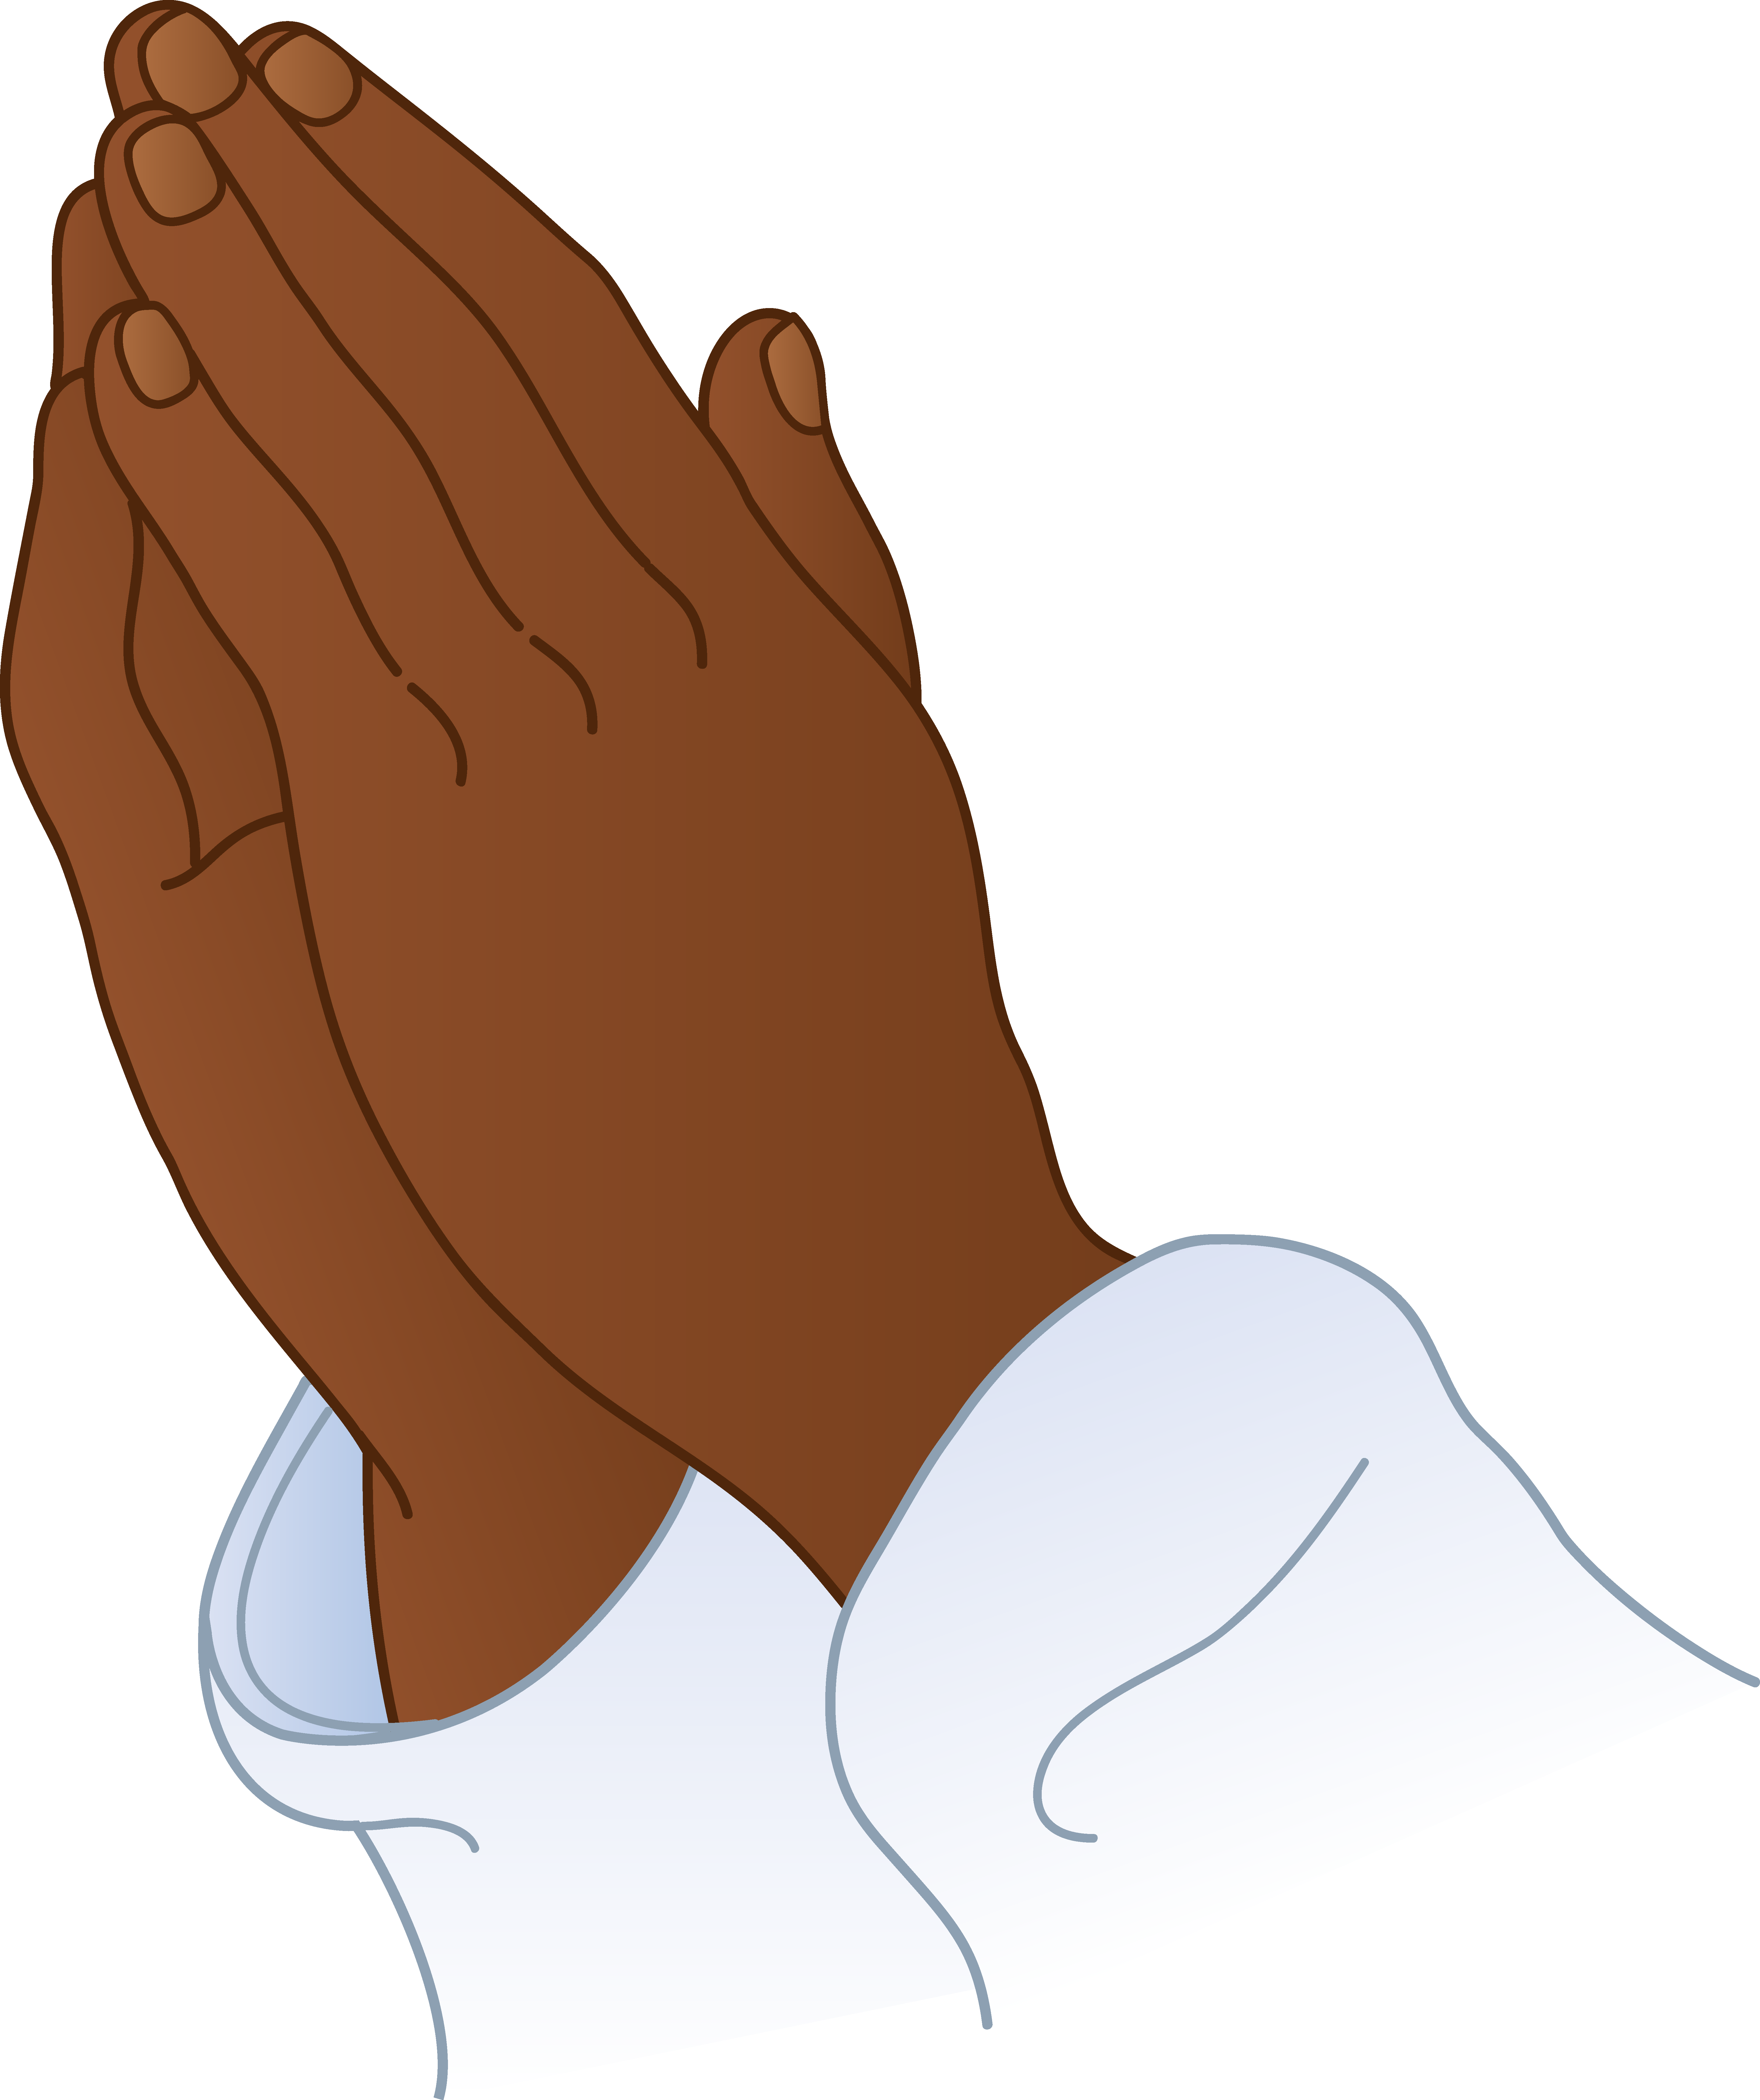 Praying Hands Images Free - Cliparts.co